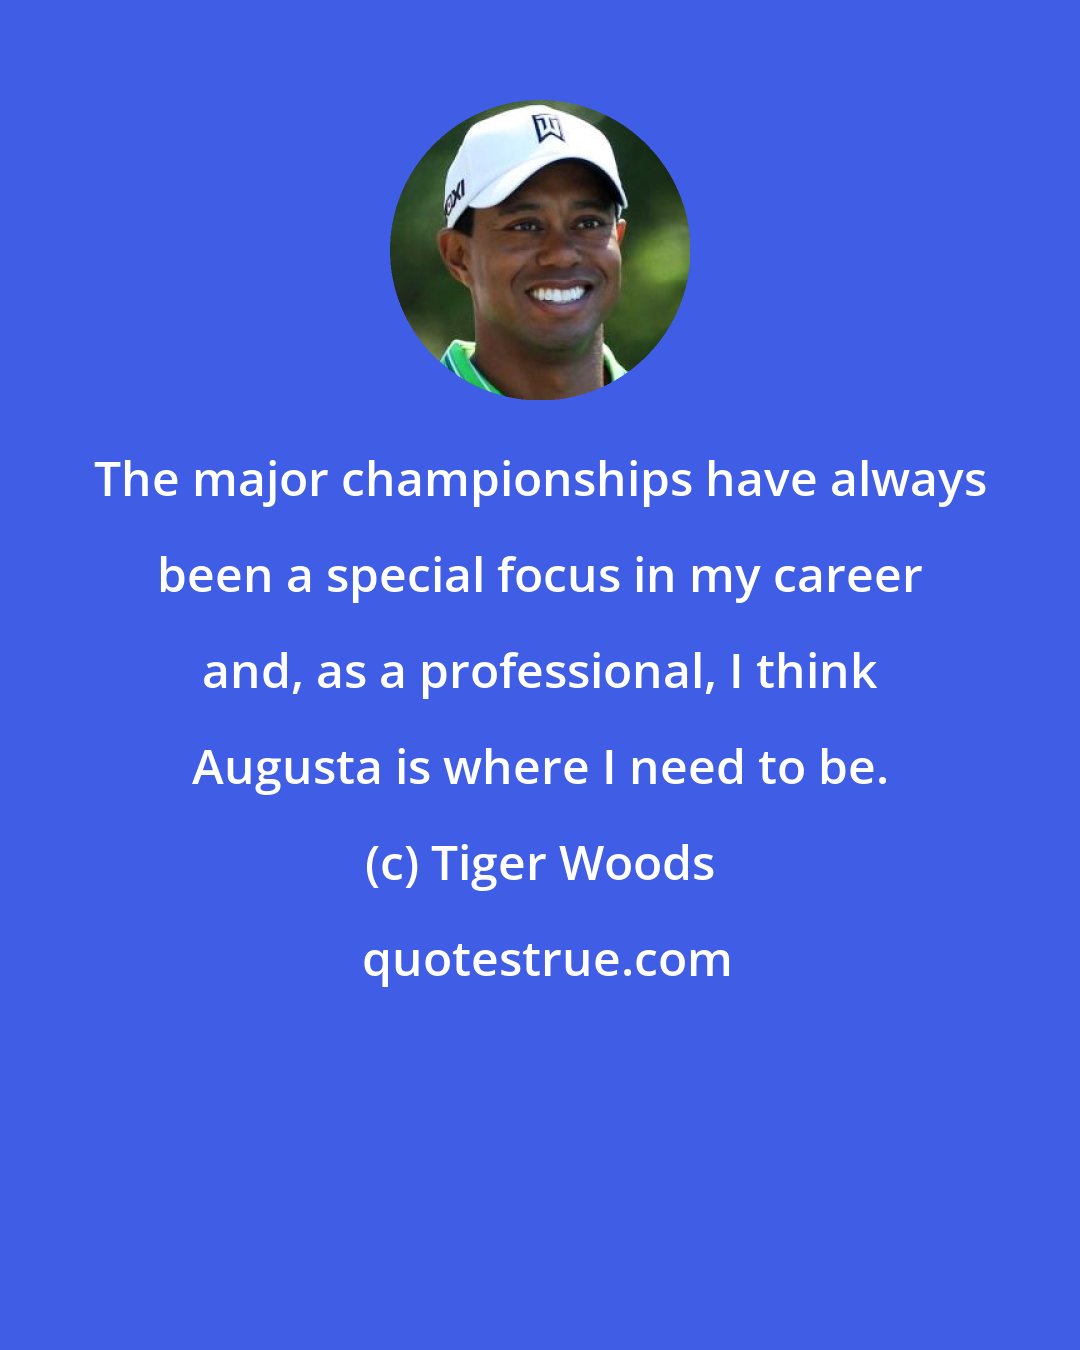 Tiger Woods: The major championships have always been a special focus in my career and, as a professional, I think Augusta is where I need to be.